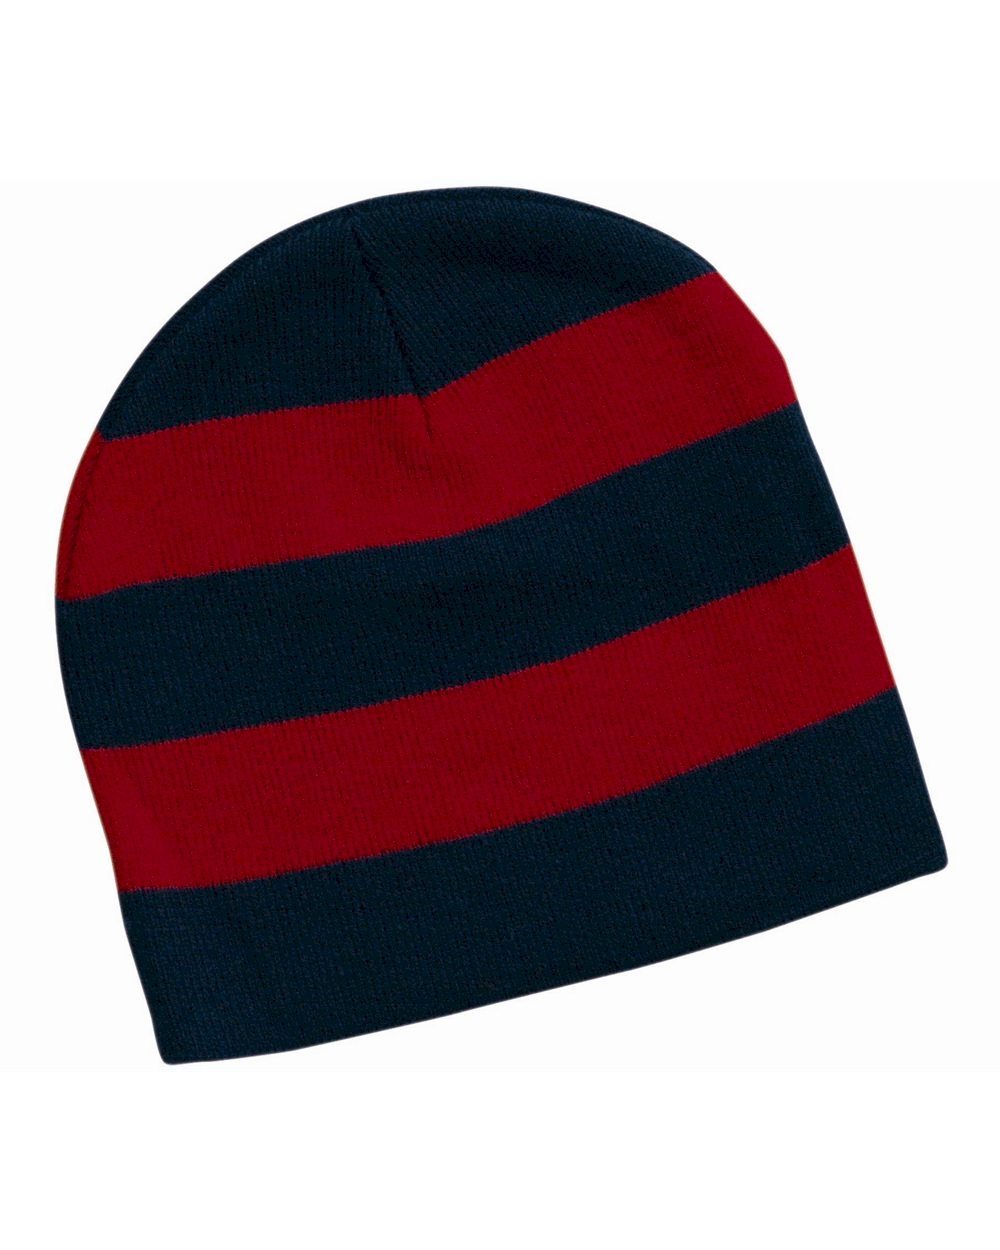 Rugby Striped Knit Beanie Embroidery Blanks - Navy/Red